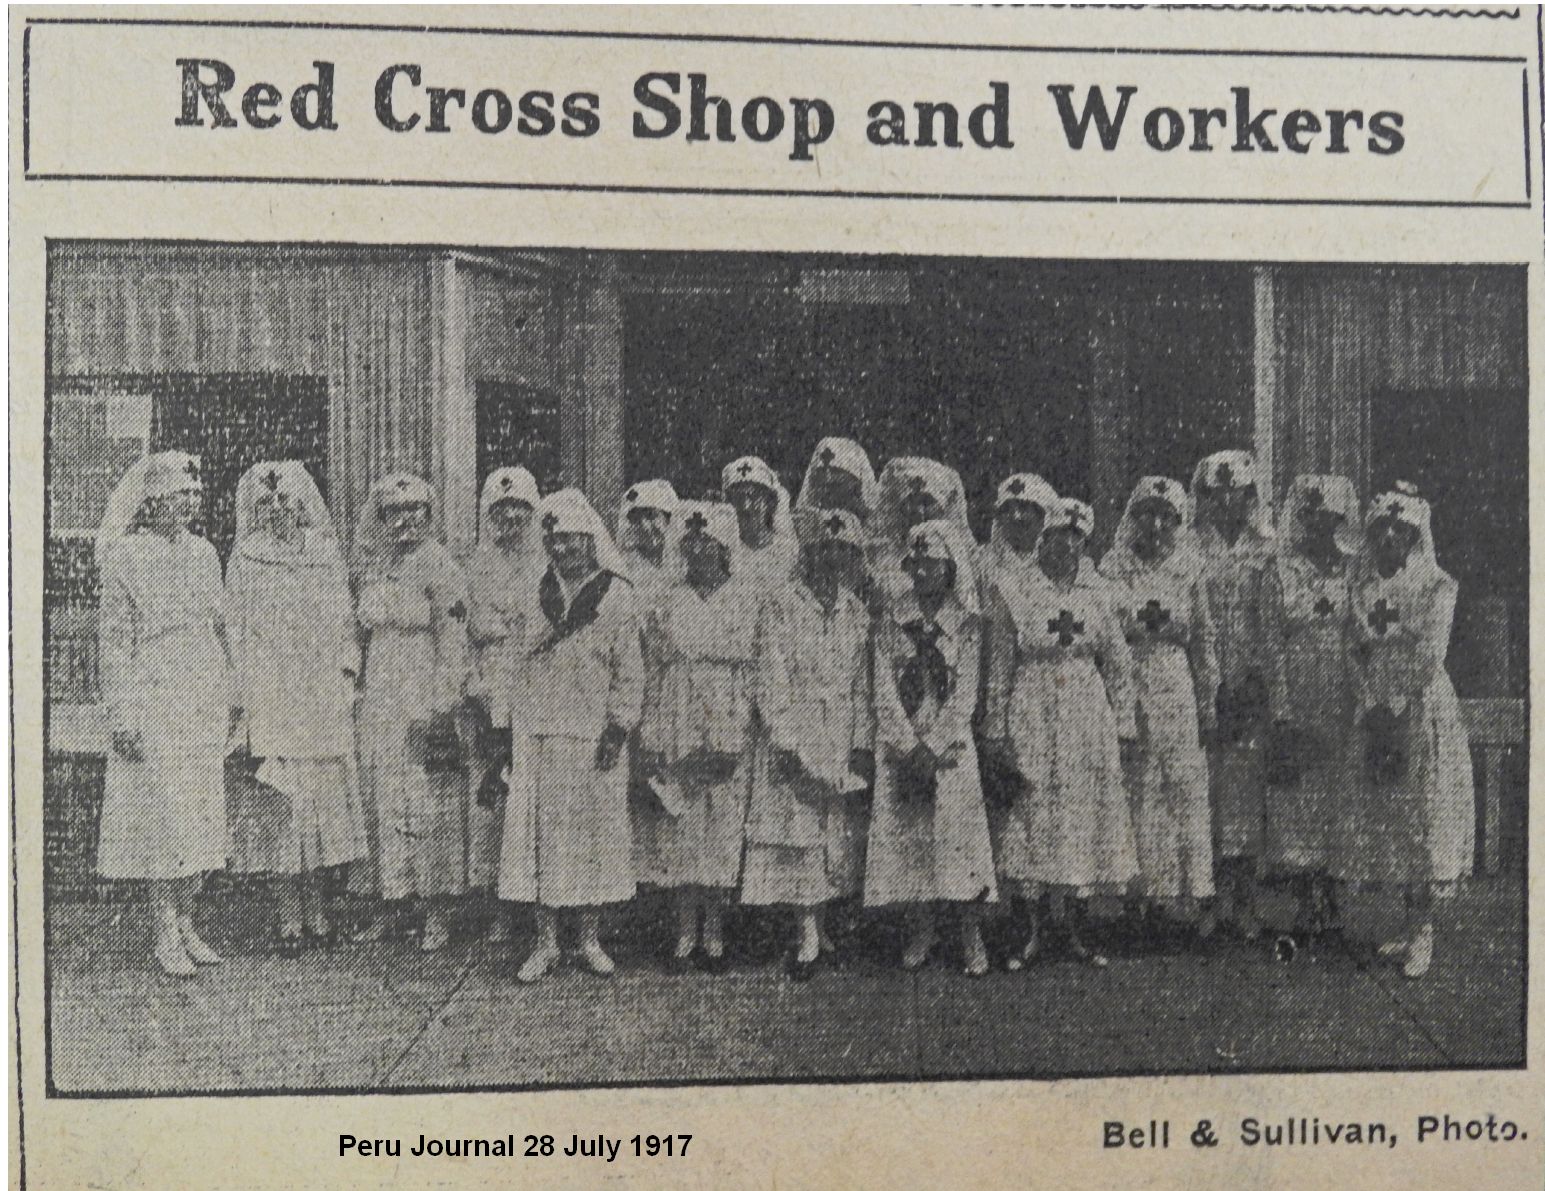 Red Cross Shop and Workers Peru Journal July 28 1917